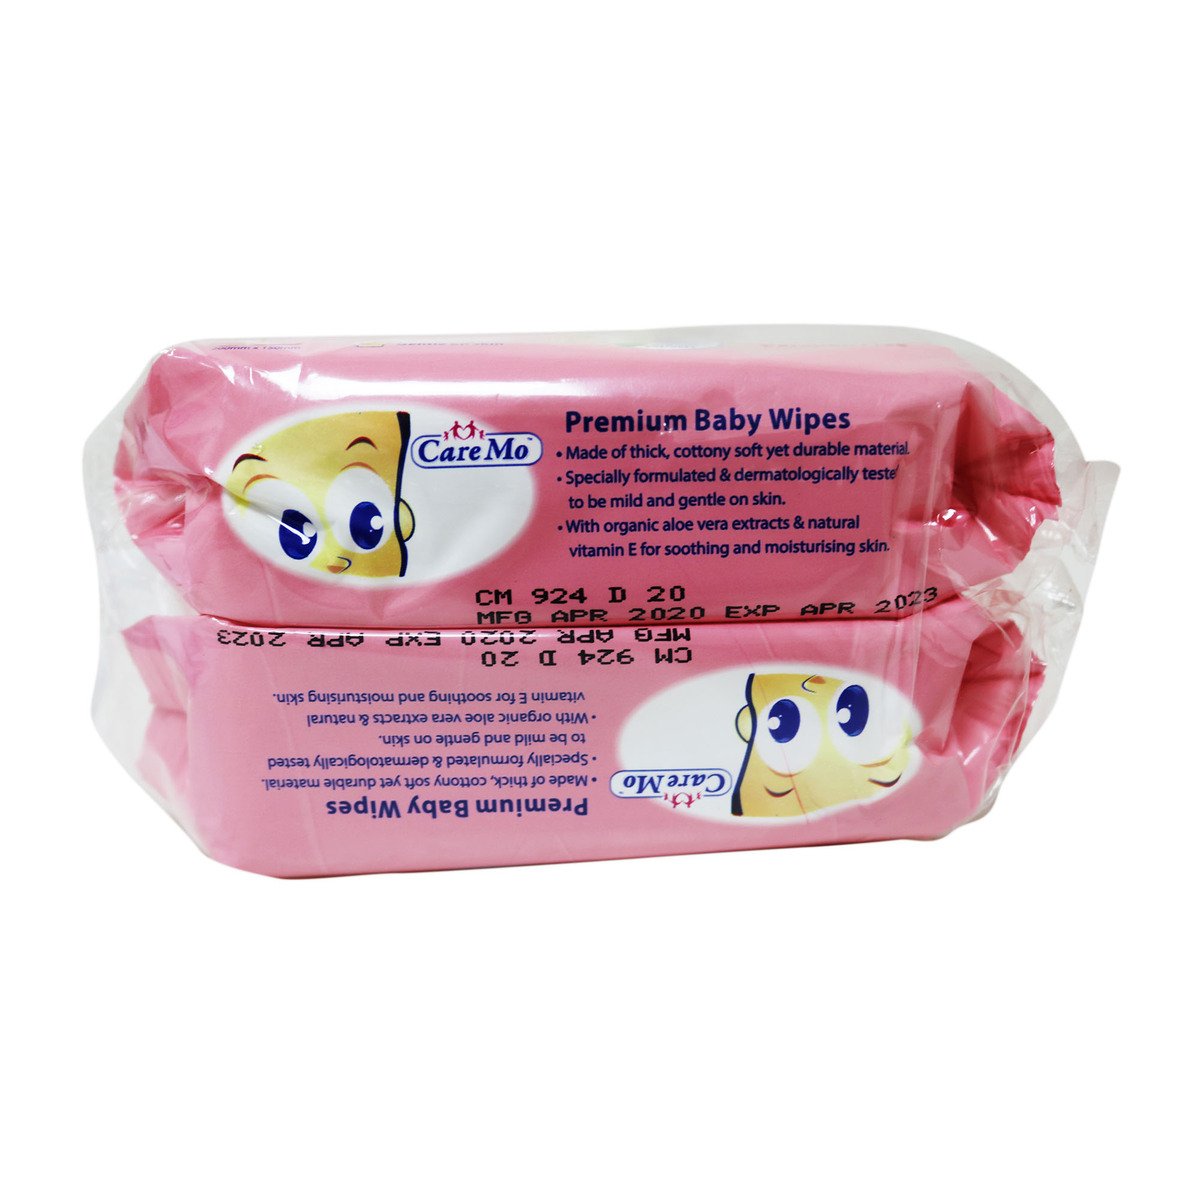 Caremo Fragrance Free Baby Wipes 2 x 30sheets